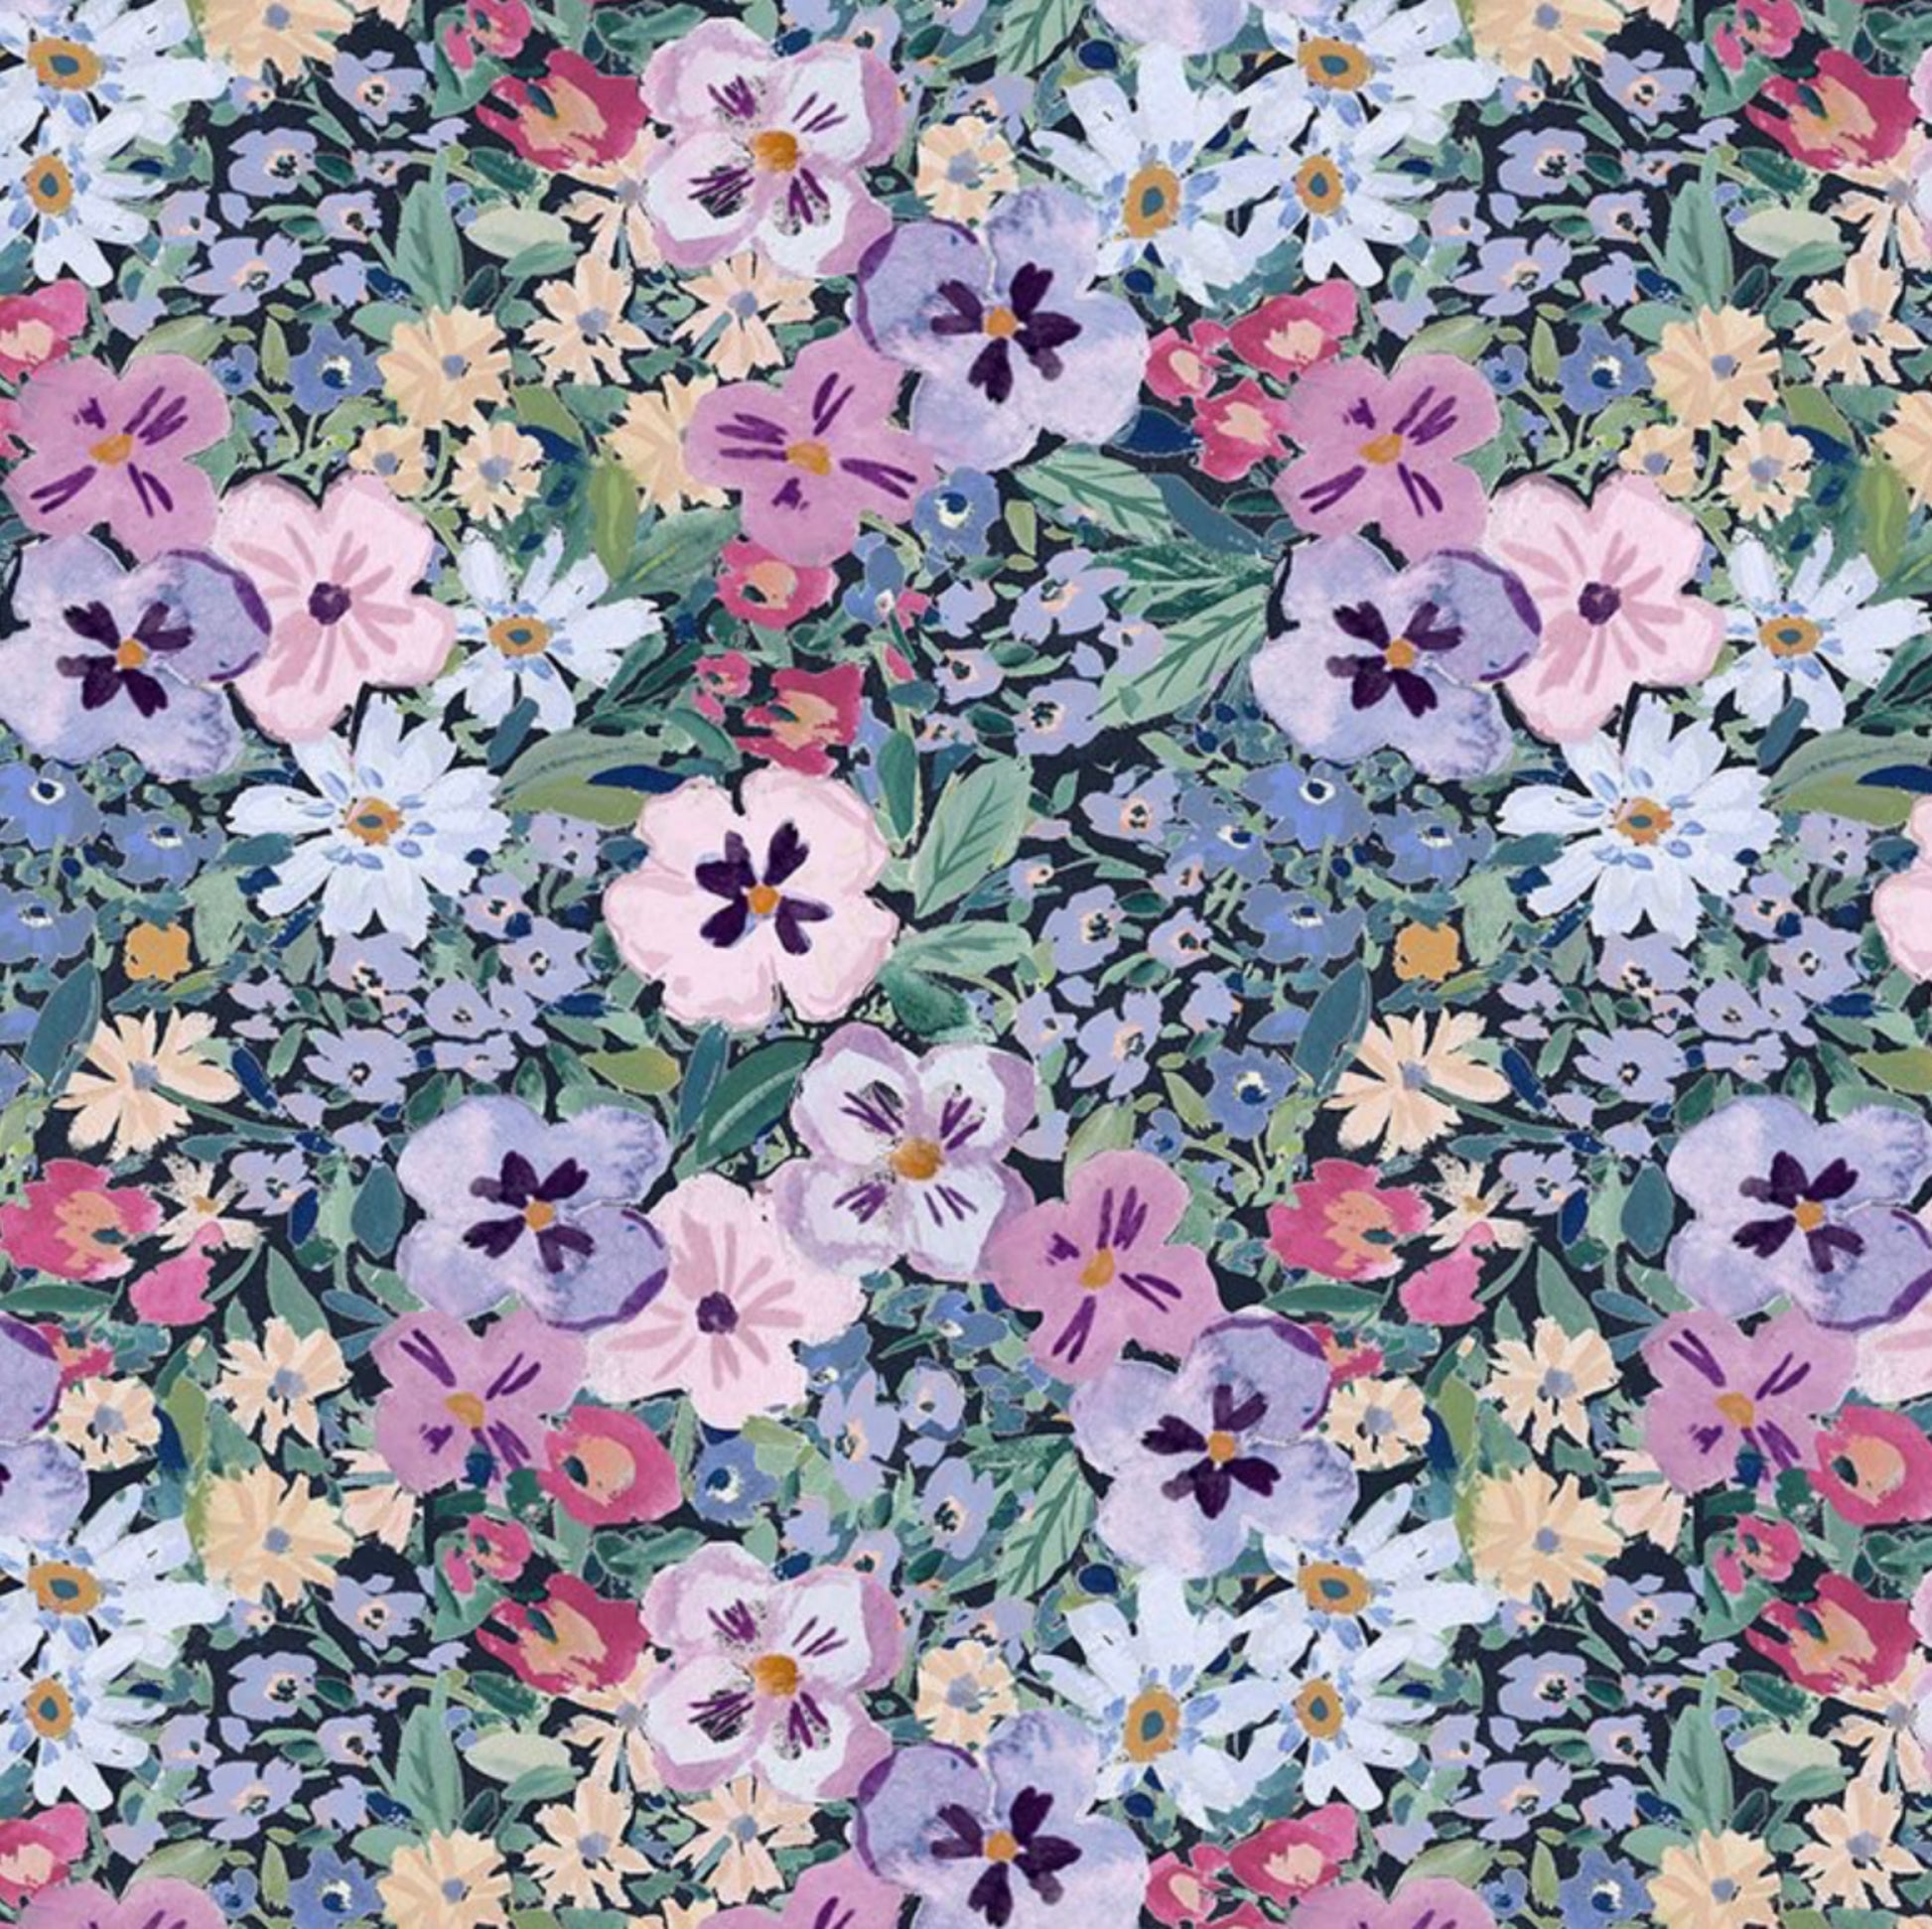 Pansy Garden Fabric from the Spring it On Collection by Clara Jean for Dear Stella Fabrics. Pretty pastel pansies, coordinates with the Cat Garden Fabric from the same collection.